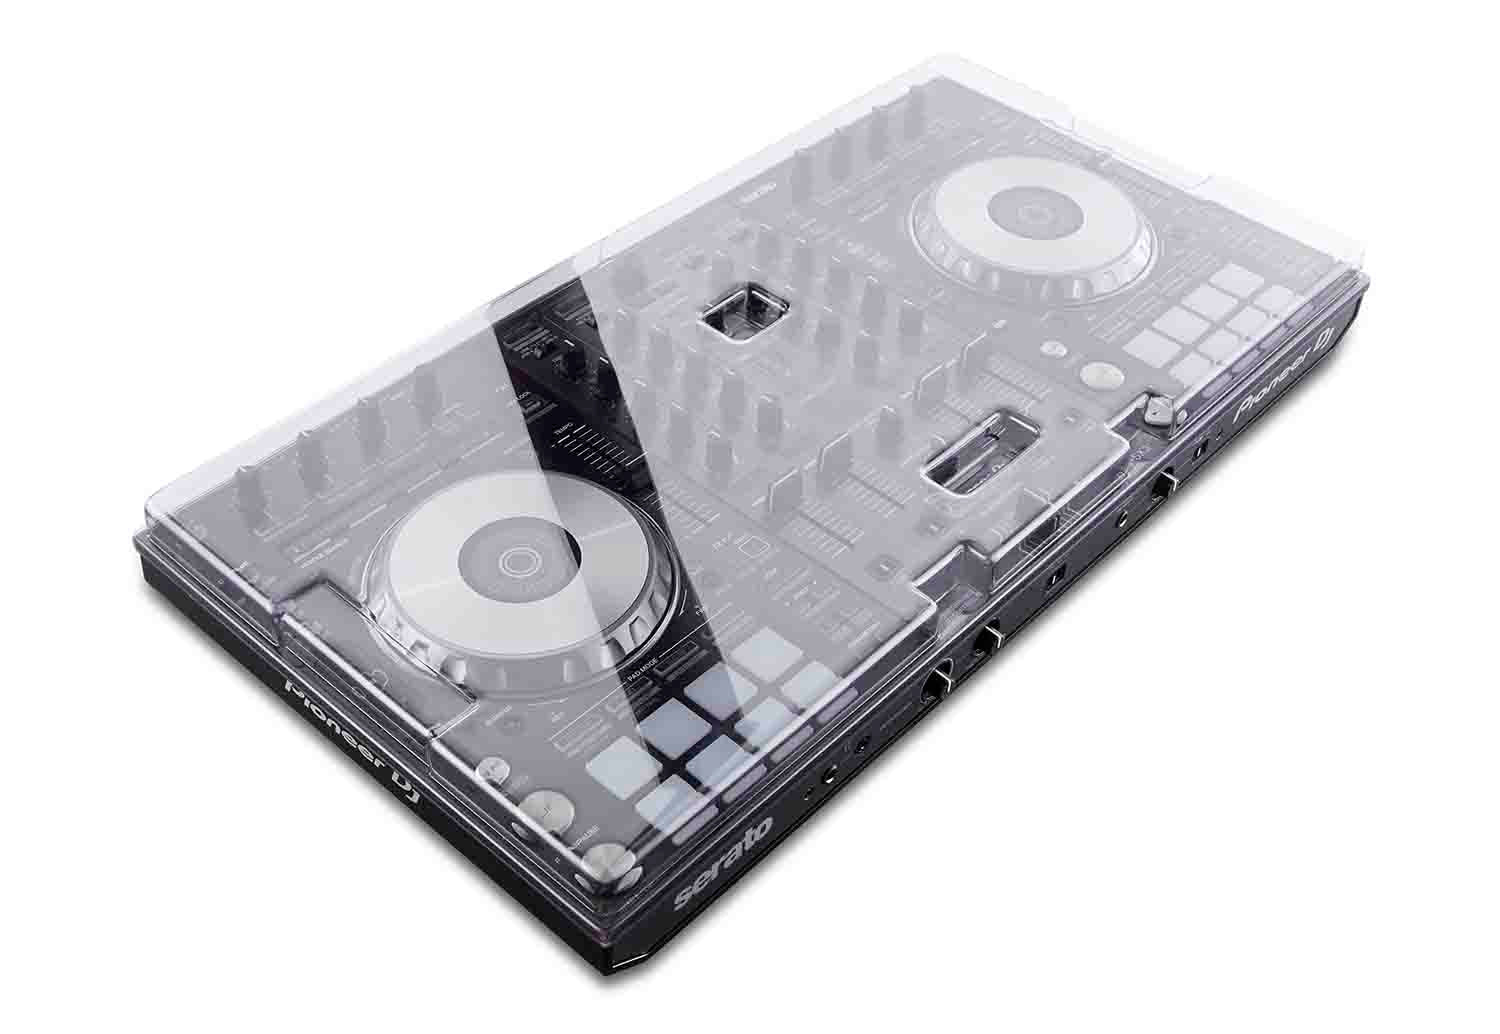 B-Stock: Decksaver DS-PC-DDJSX3 Protection Cover for Pioneer DDJ-SX3 DJ Controller - Hollywood DJ